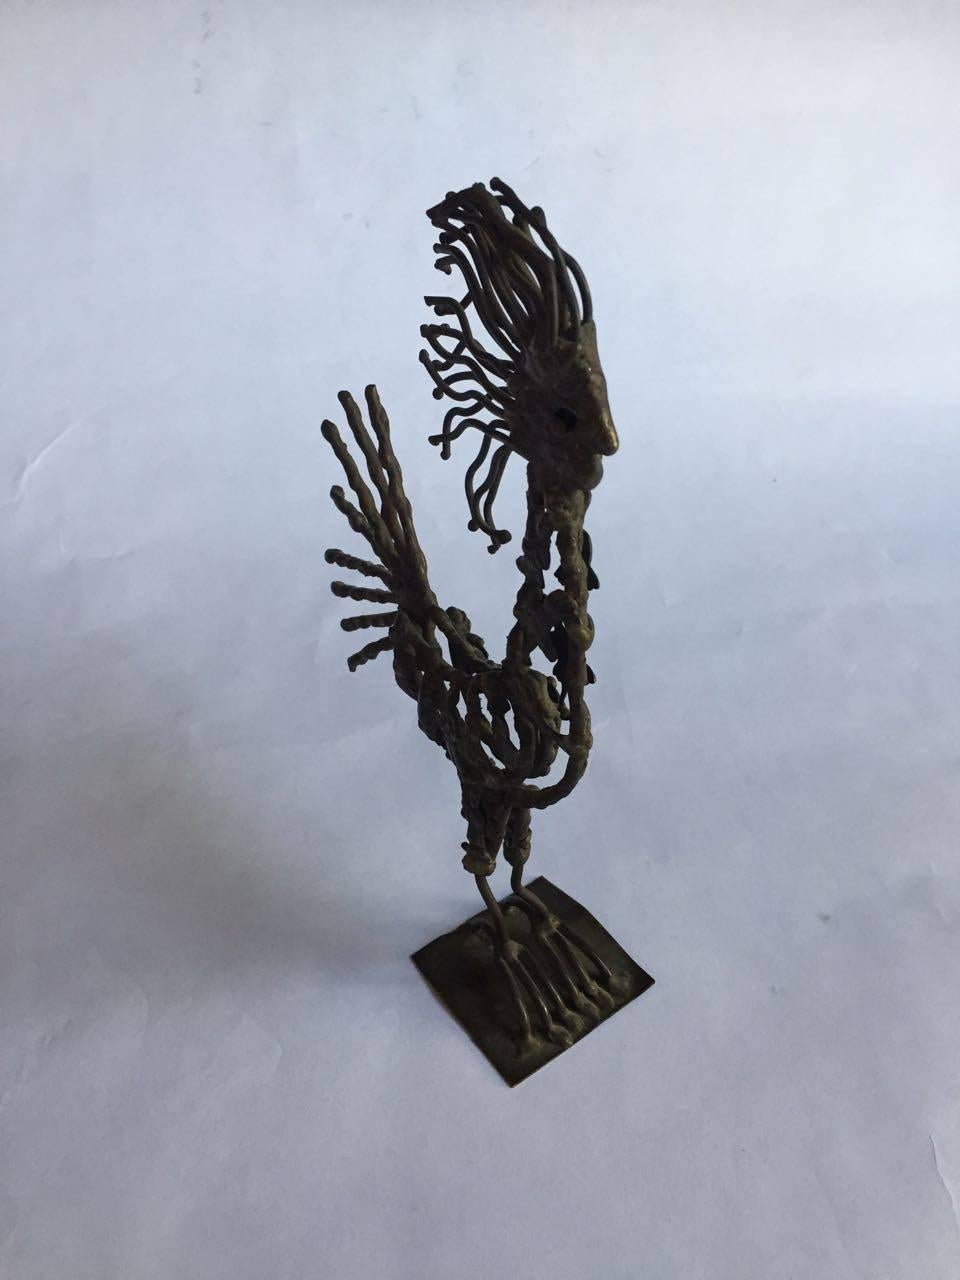 Brutalist bronze rooster sculpture by Pal Kepenyes.

Sculptor from Hungary who was nationalized Mexican, he resides in Acapulco where he has a studio, in his sculptures we can appreciate romantic, ludic and social representations of history, which